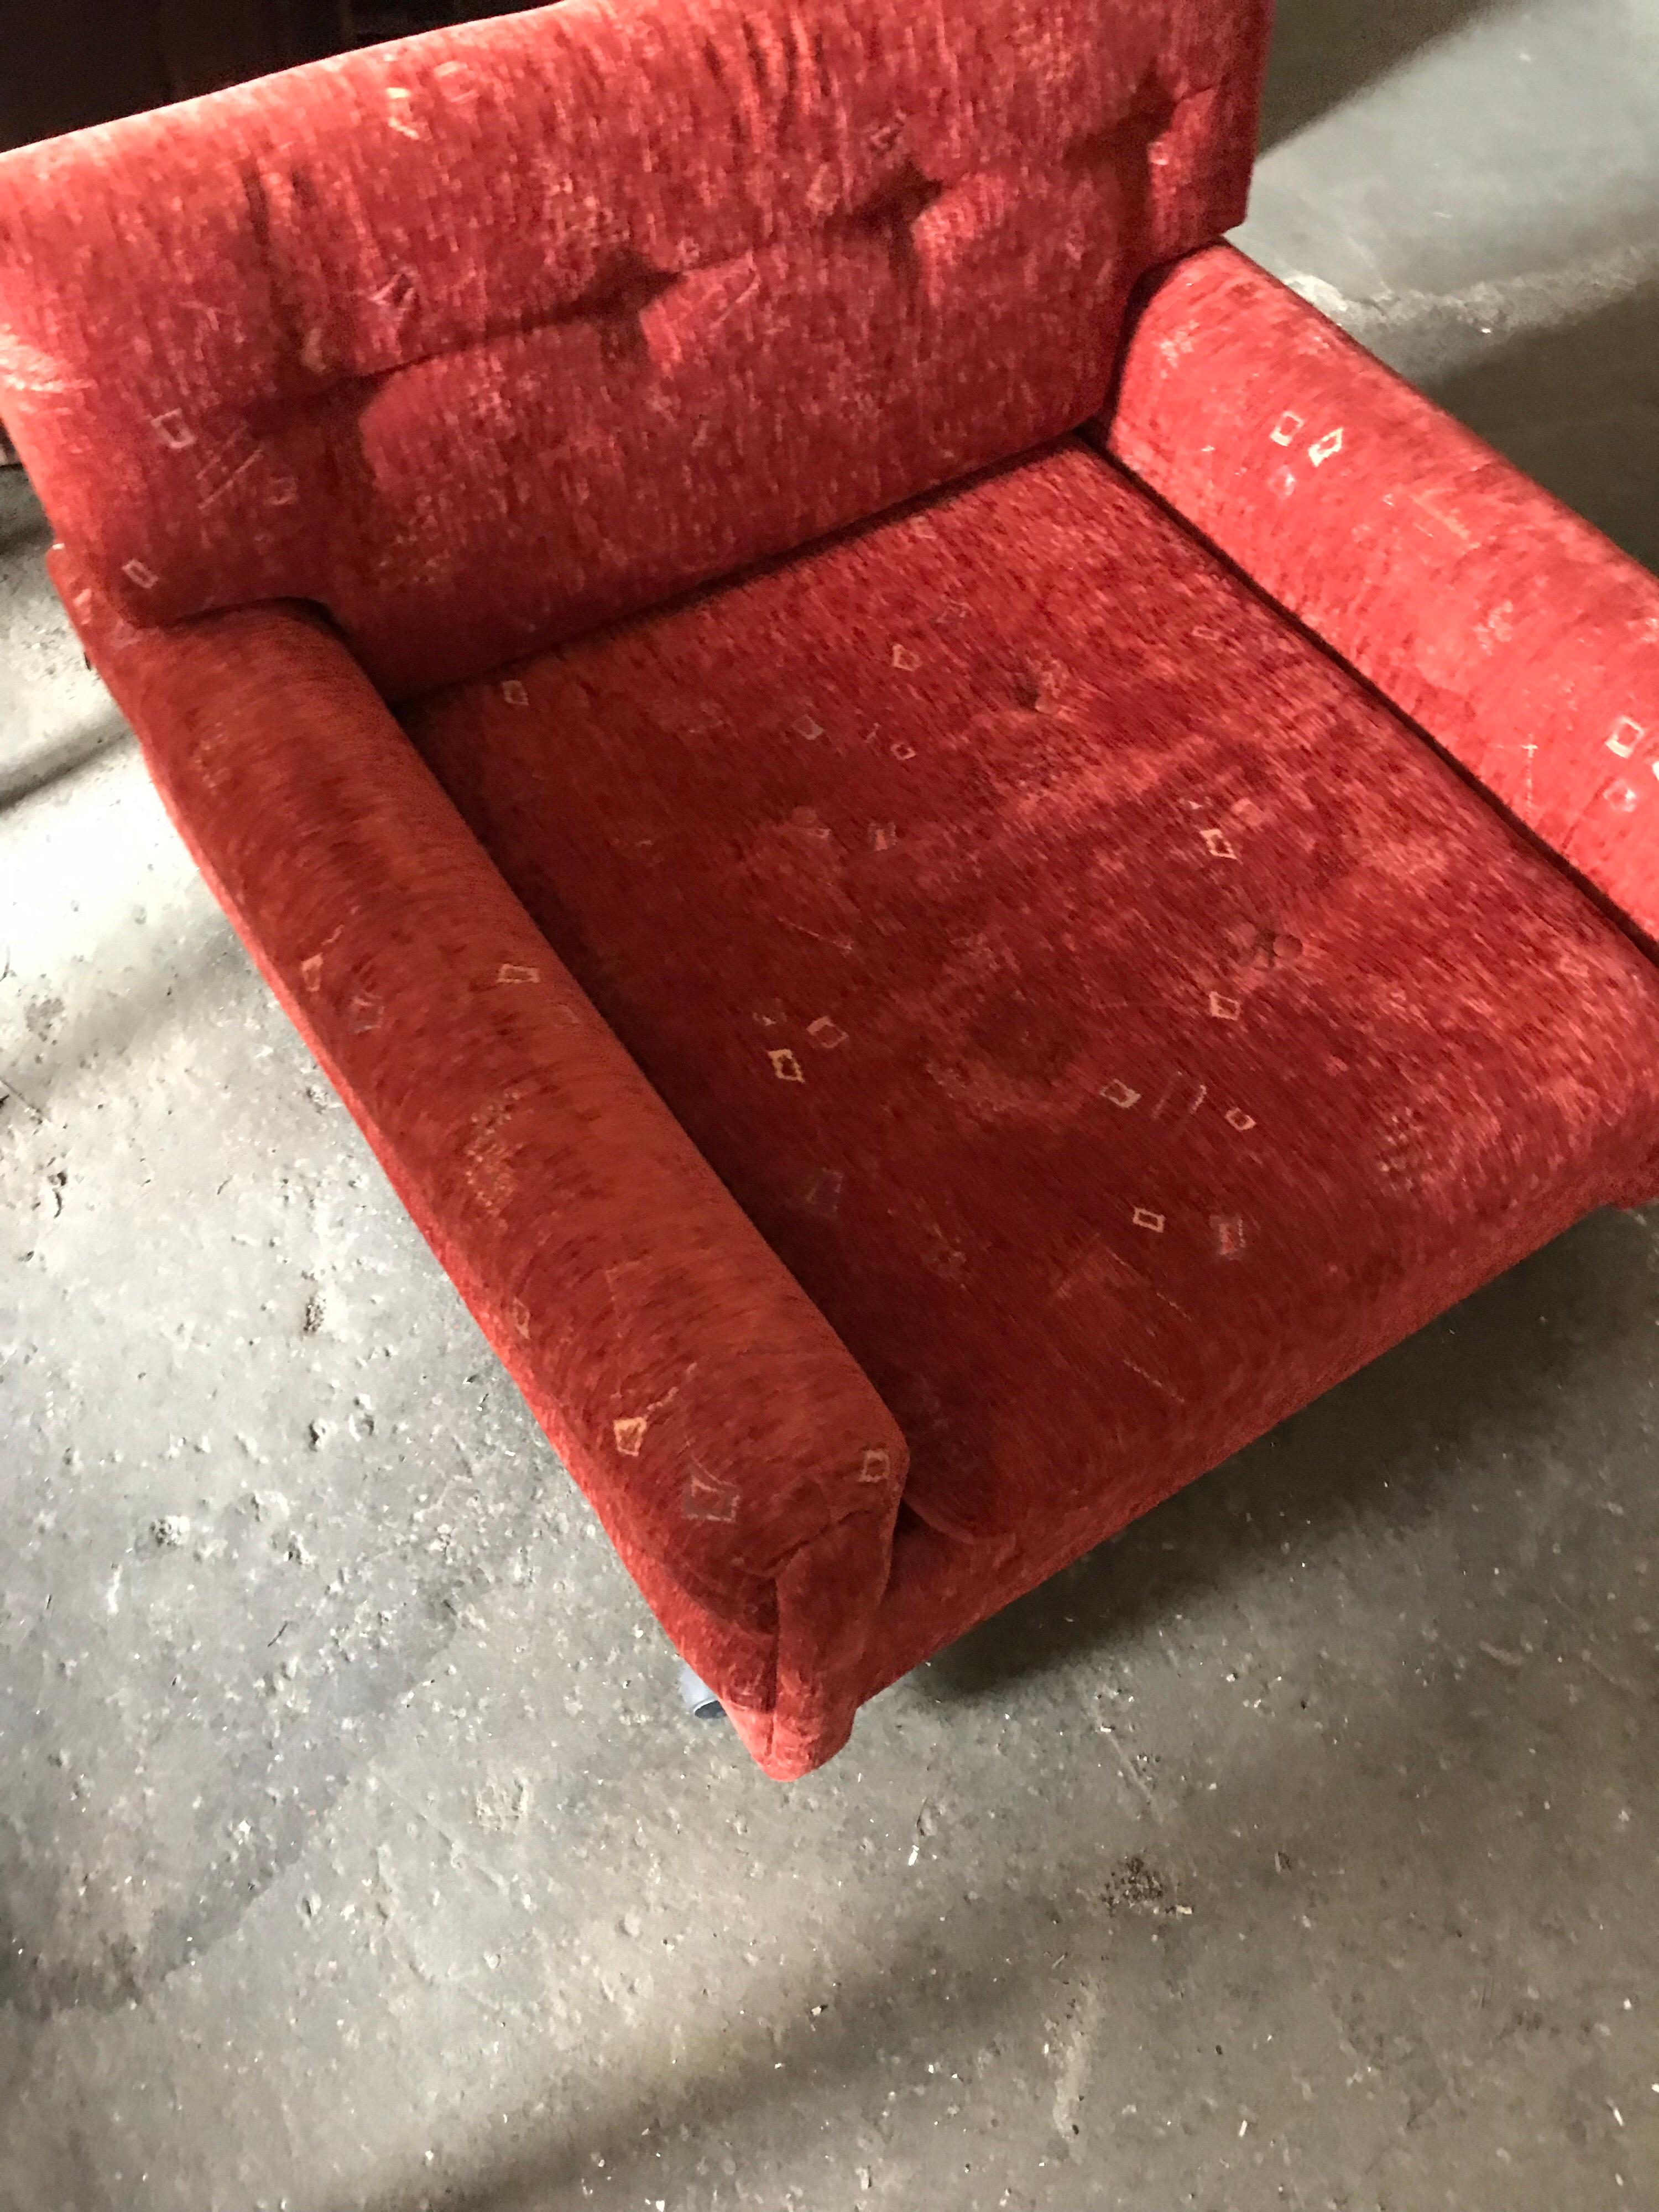 Midcentury armchairs, 1960s, set of two
Size: 86 x 85 x 70, 35 seat size
They have been completely restored, with new upholstery.